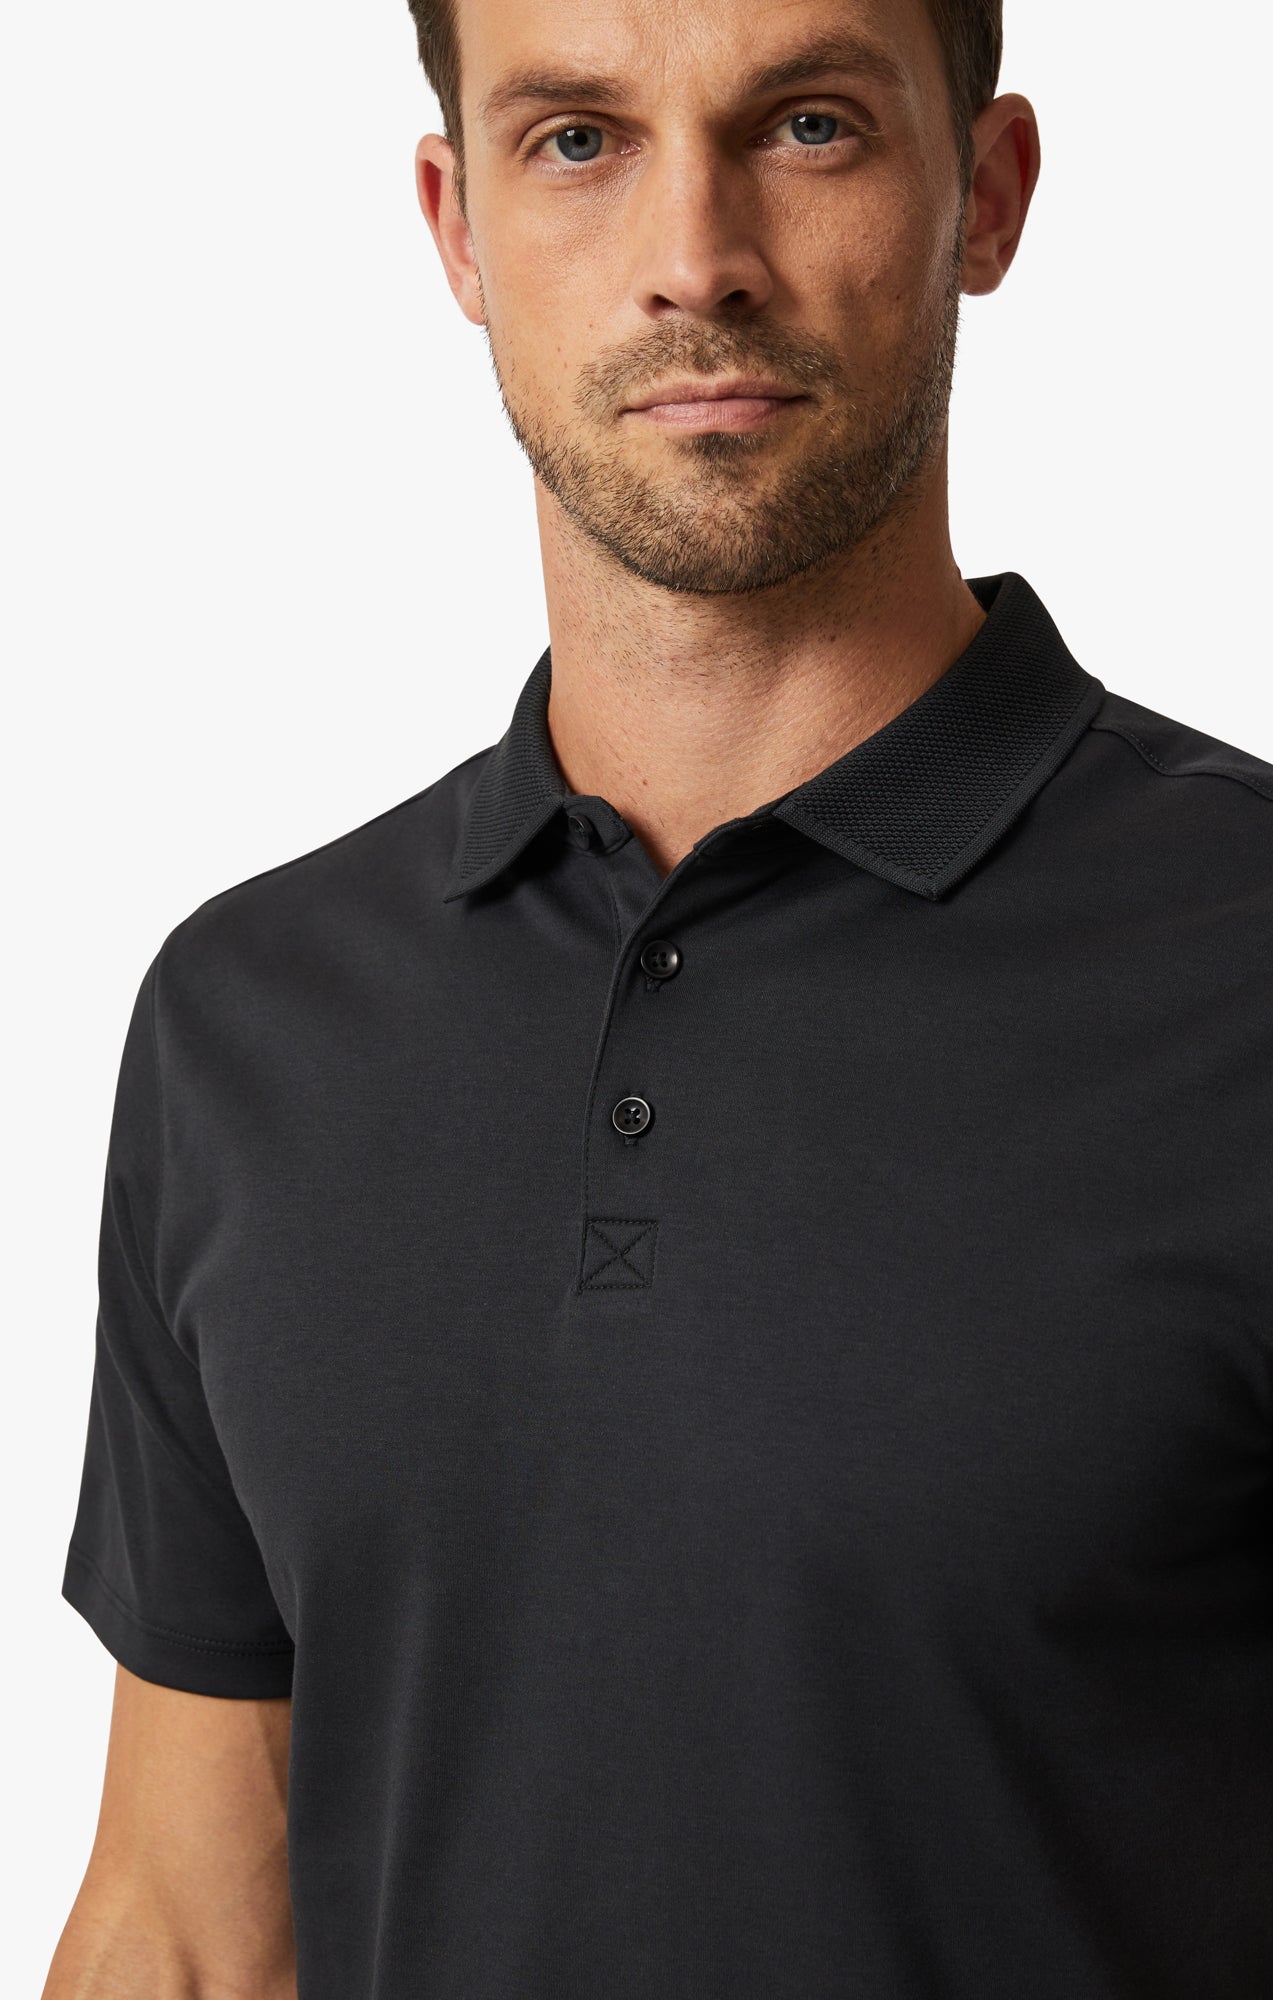 Polo T-Shirt In Black Image 5